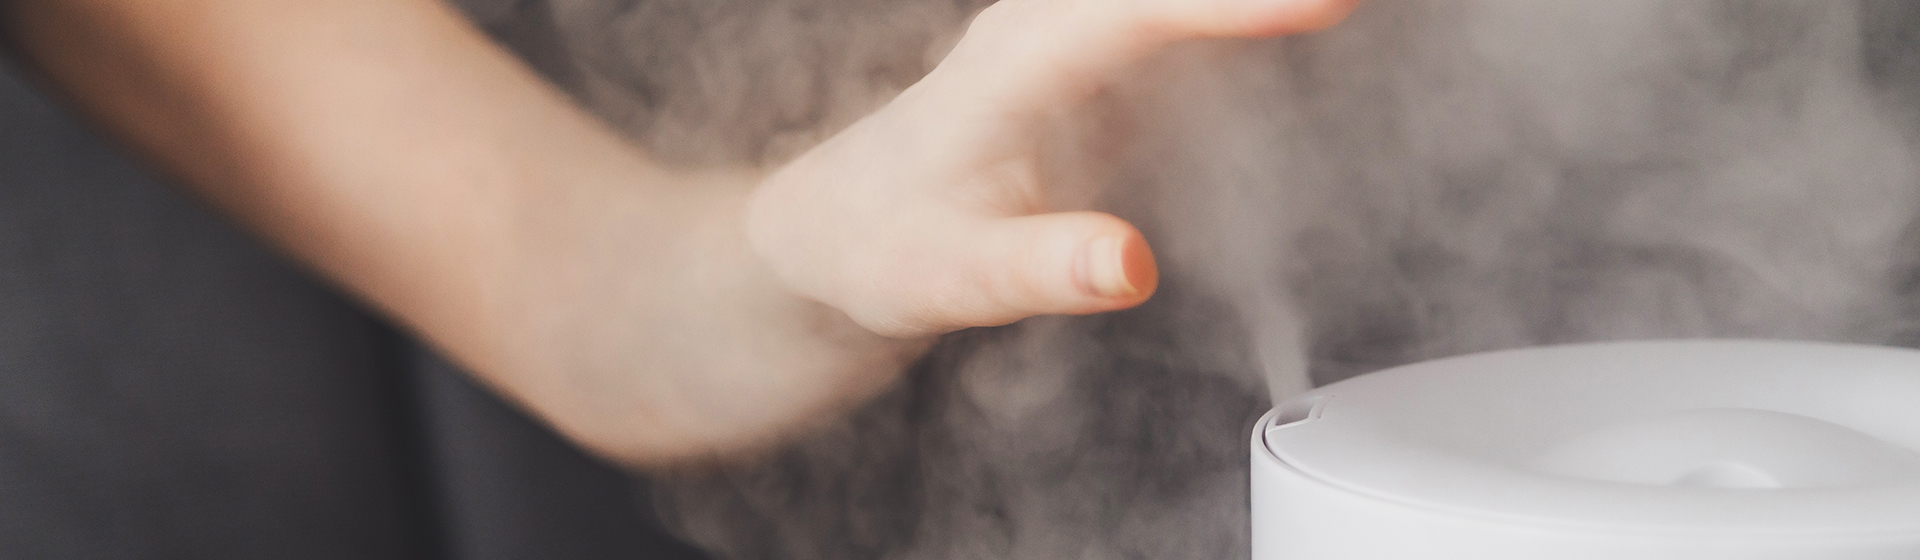 Healthy air. The humidifier distributes steam in the living room. Woman keeps hand over vapor